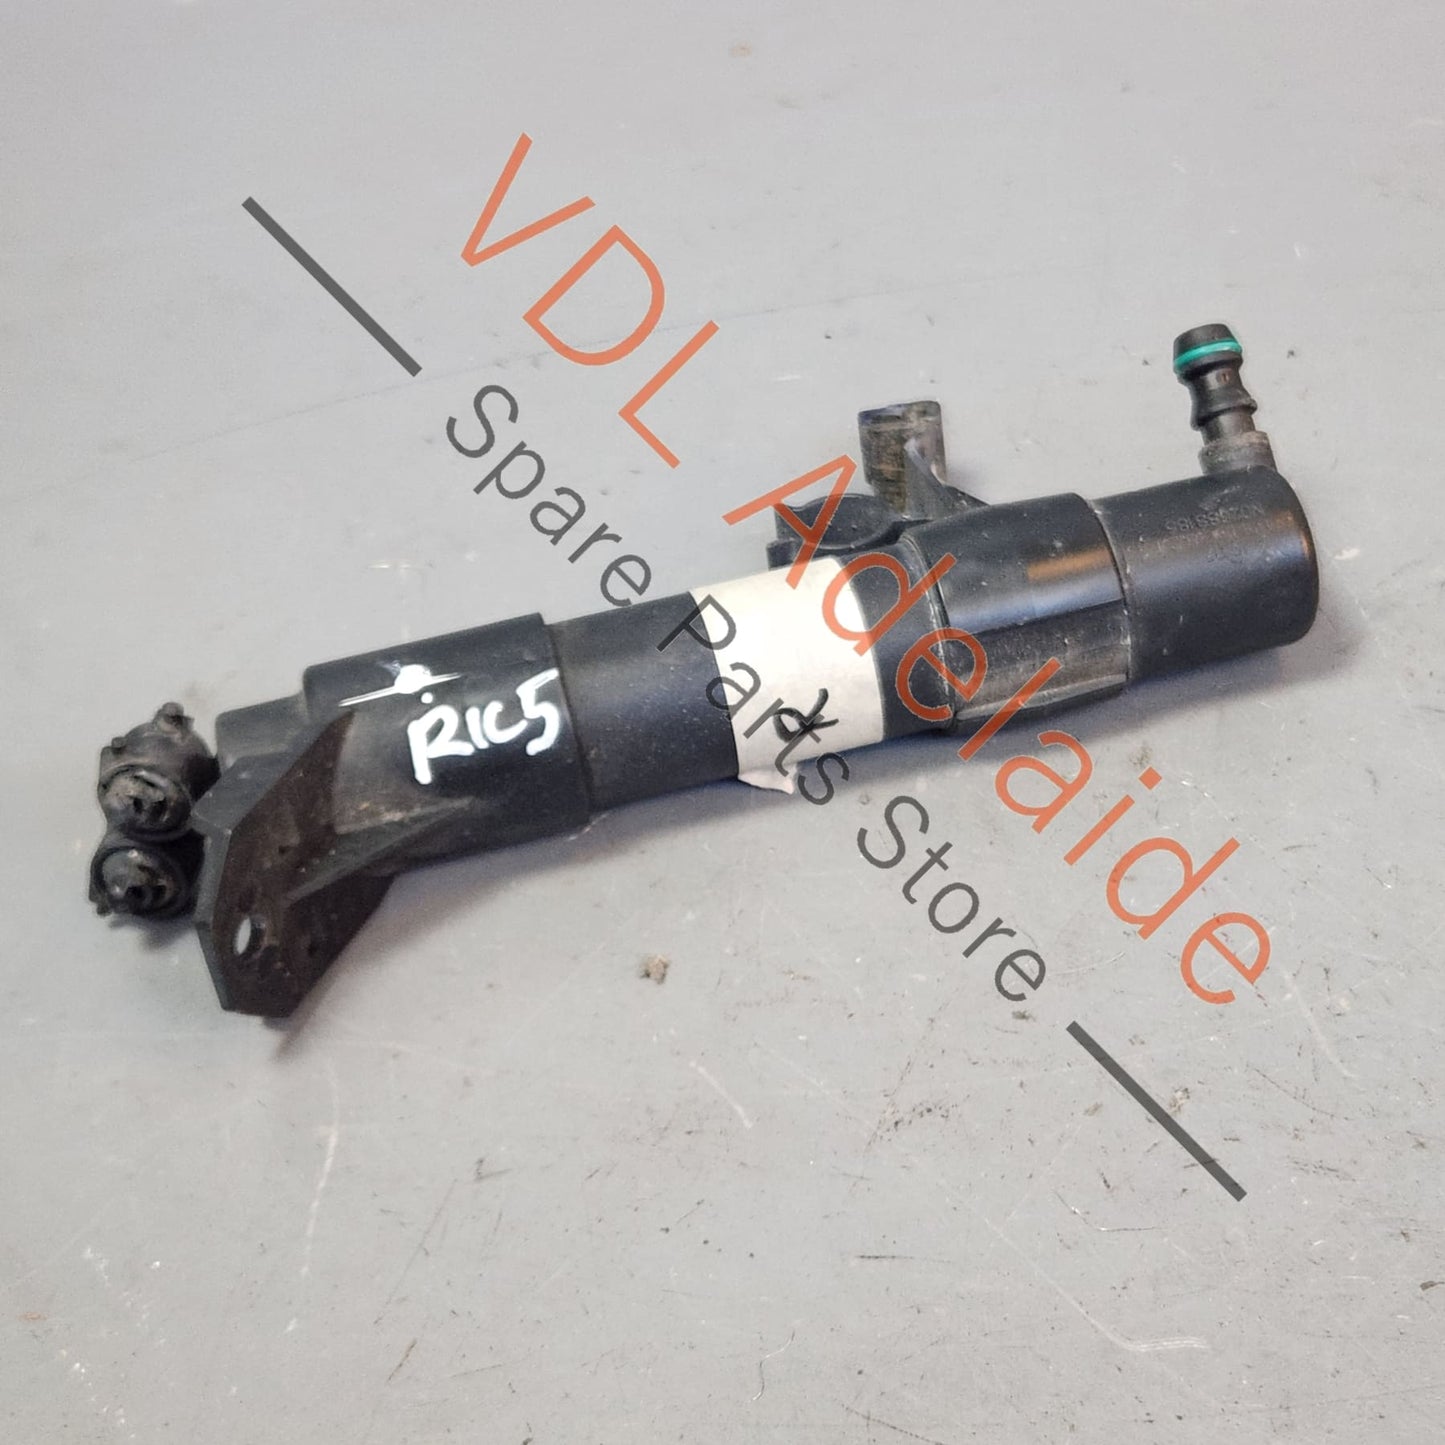 1K6955978A    VW Golf R32 MK5 Headlight Washer Nozzle Jet Left or Right Side